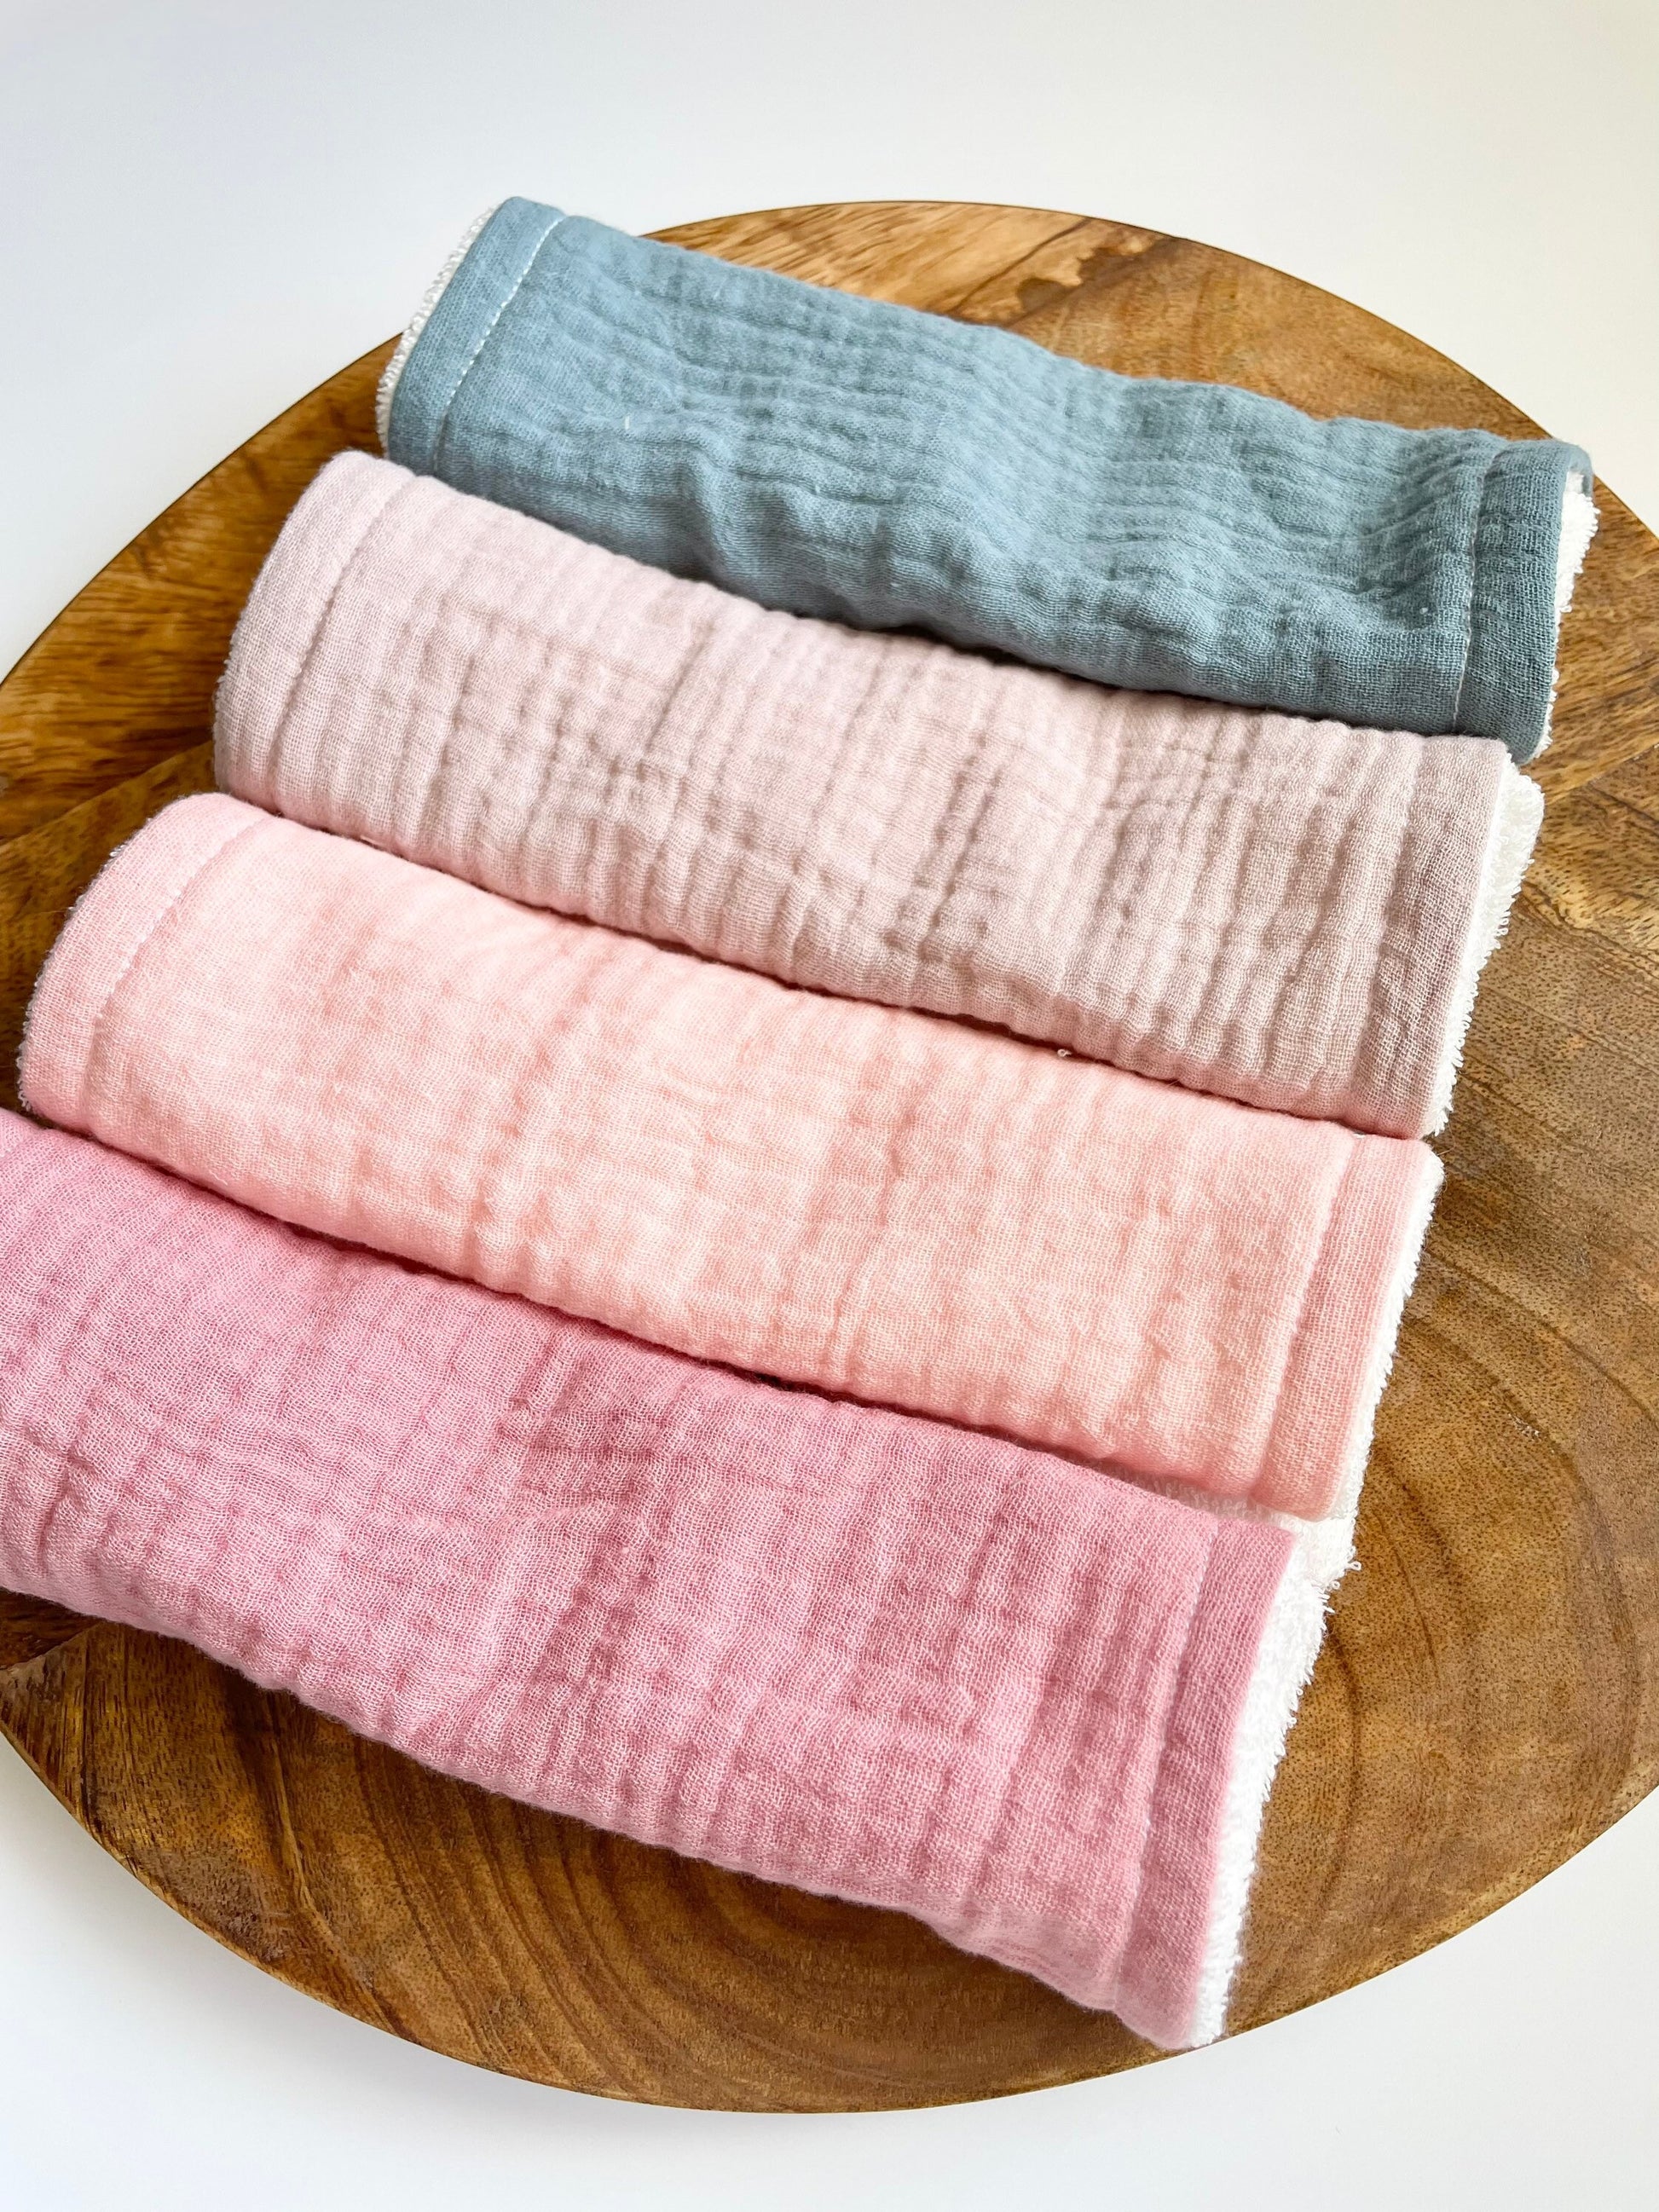 Wash Cloth organic bamboo cotton, baby girl wash bath cloth, double gauze face washer, reusable face wipes, baby gift, Olive & Miles